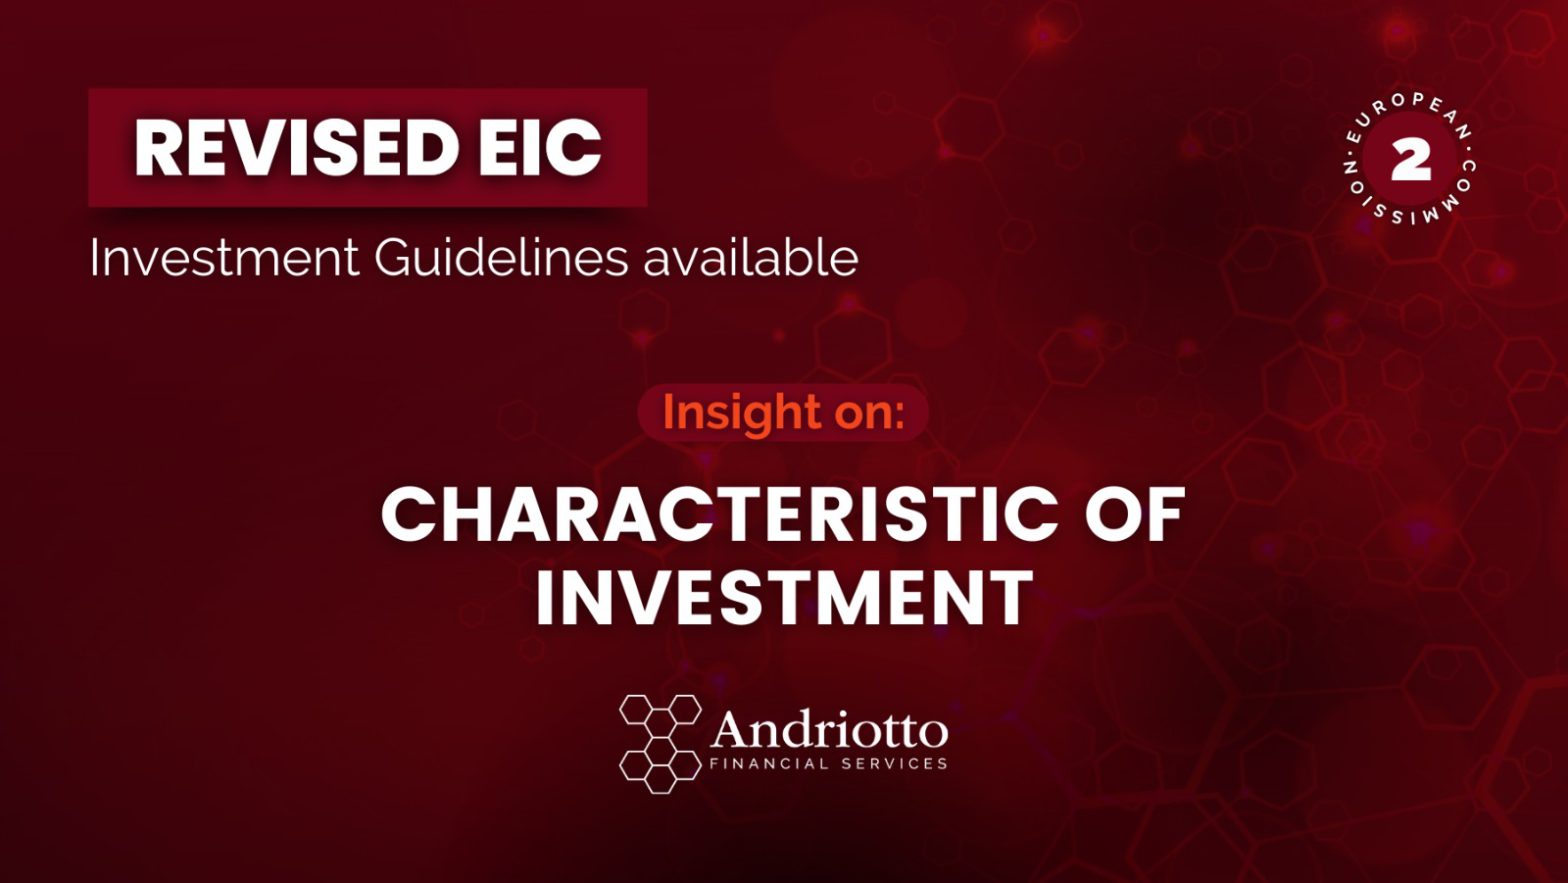 Red background with the title "Revised EIC Investment Guidelines available. Insight on characteristic of investment".